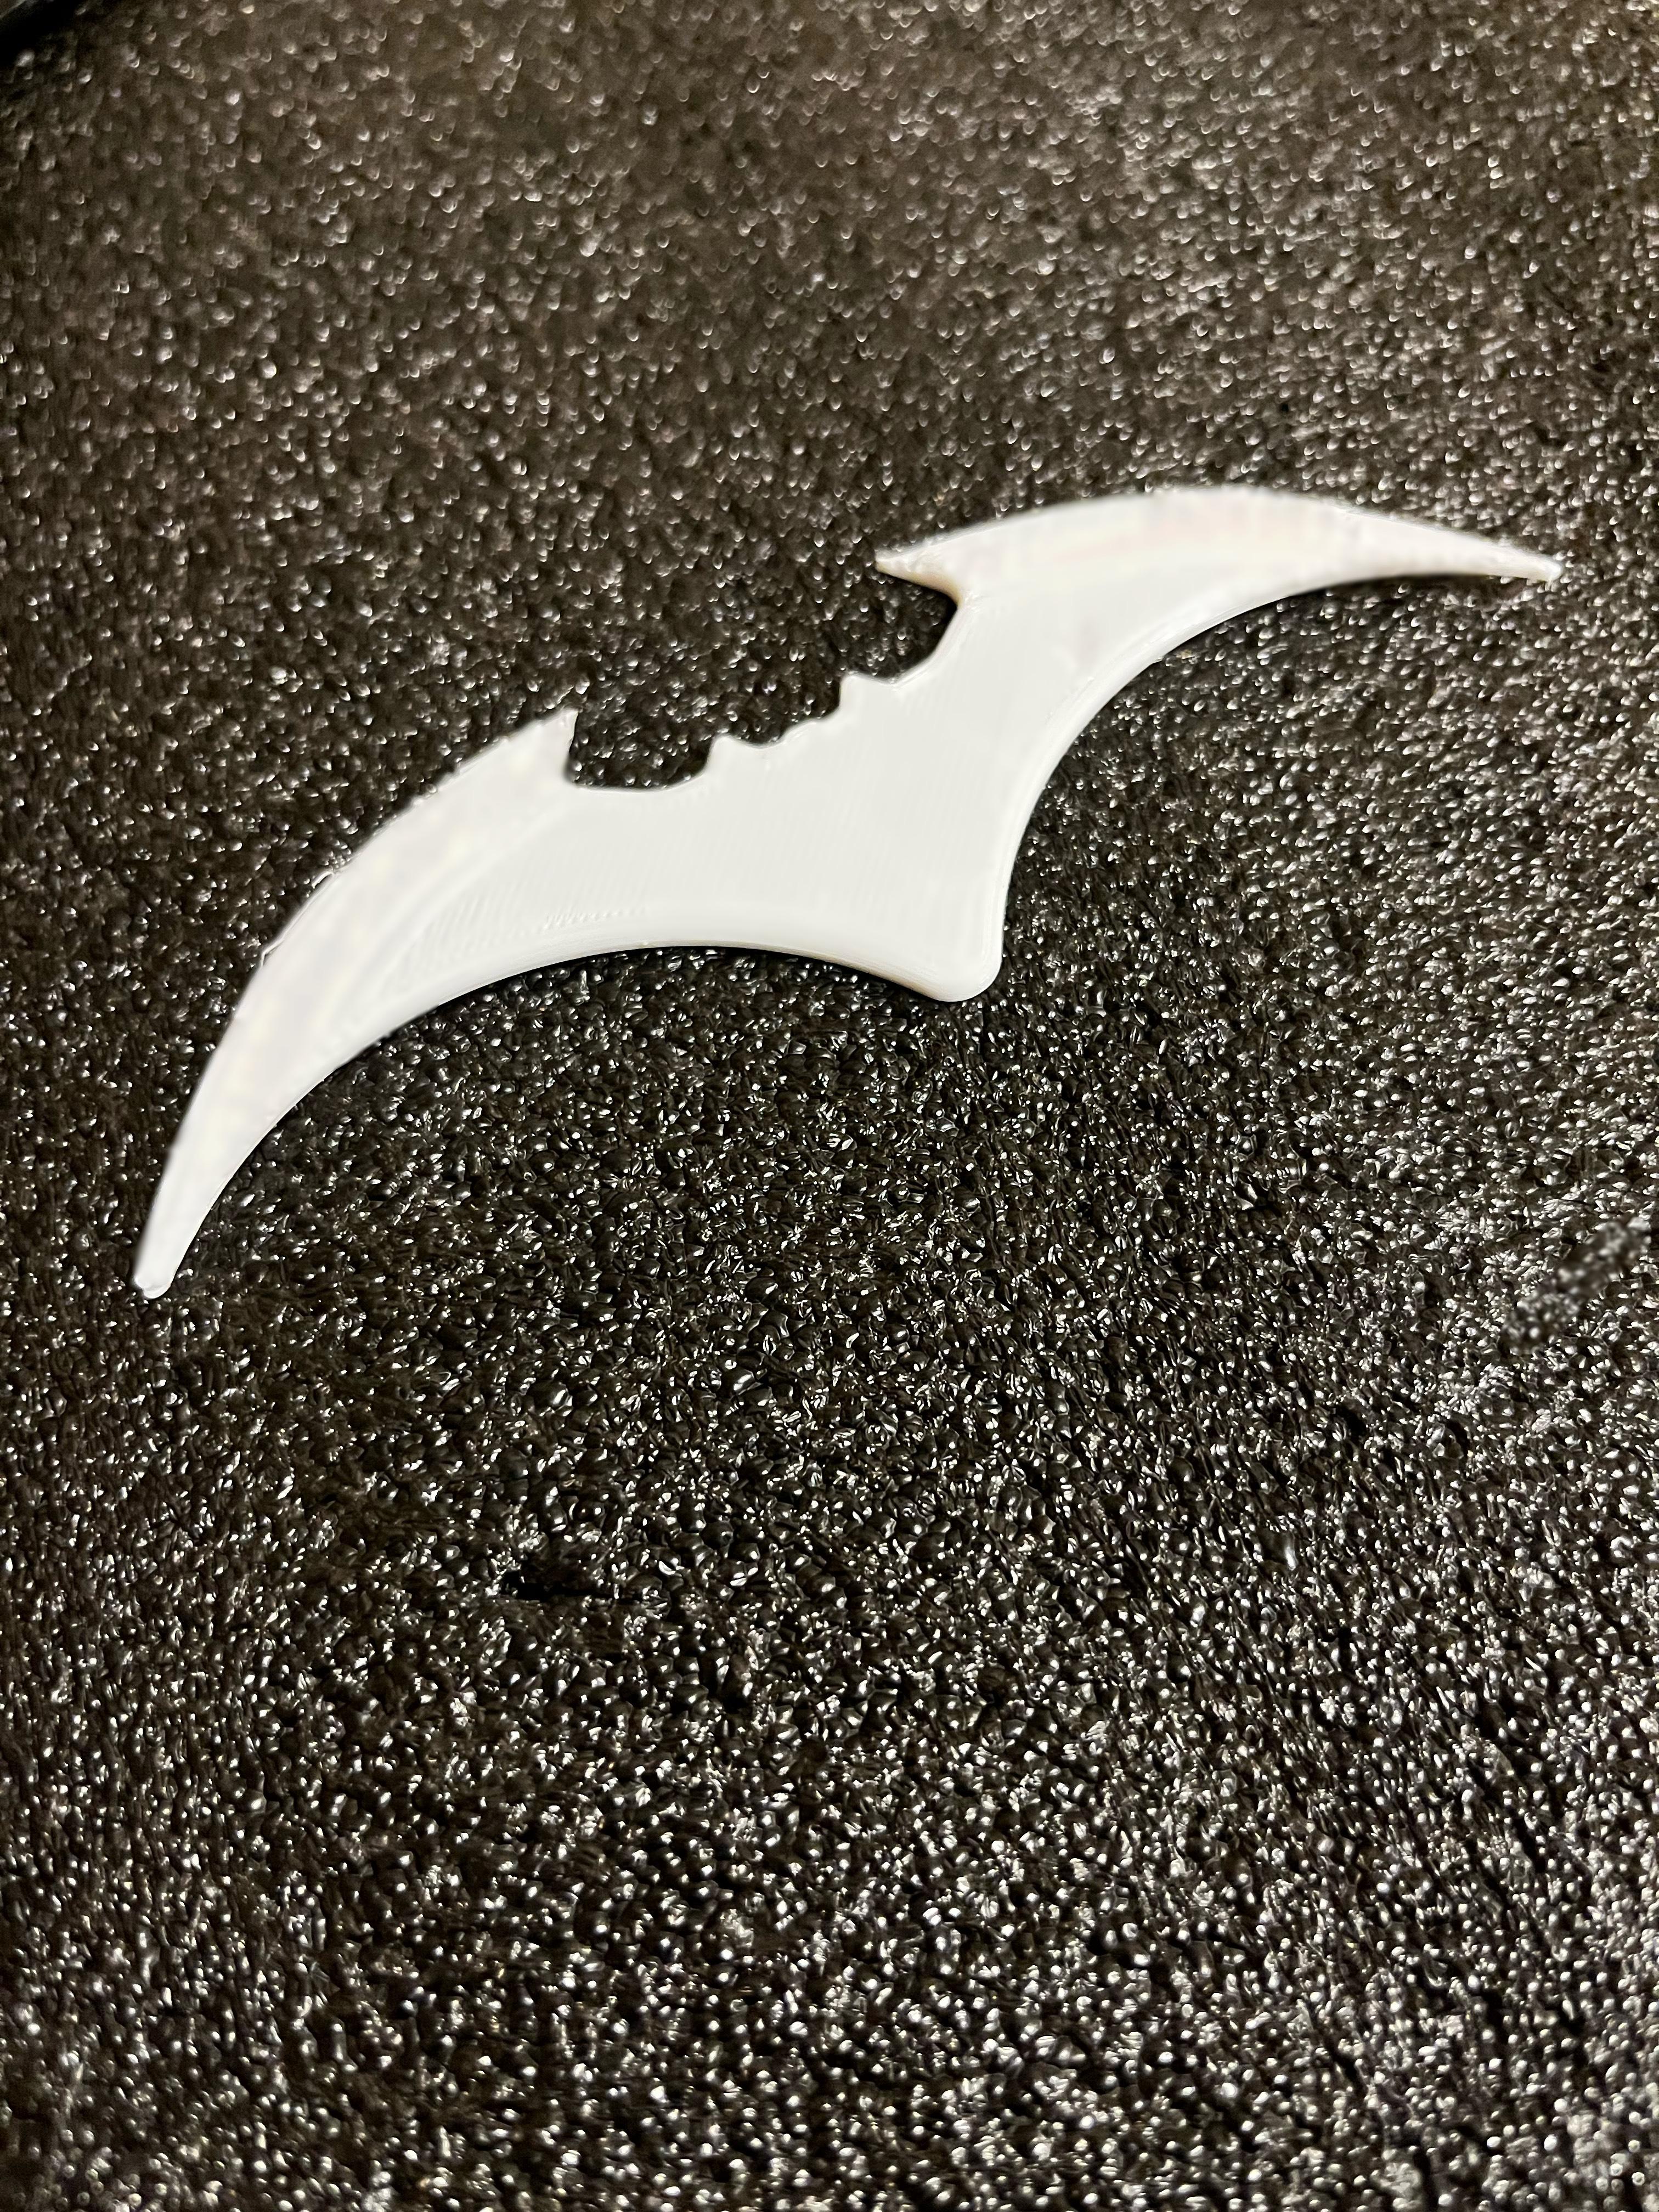 Bat Blade - Printed on CR-10v2 and sliced in cura - 3d model